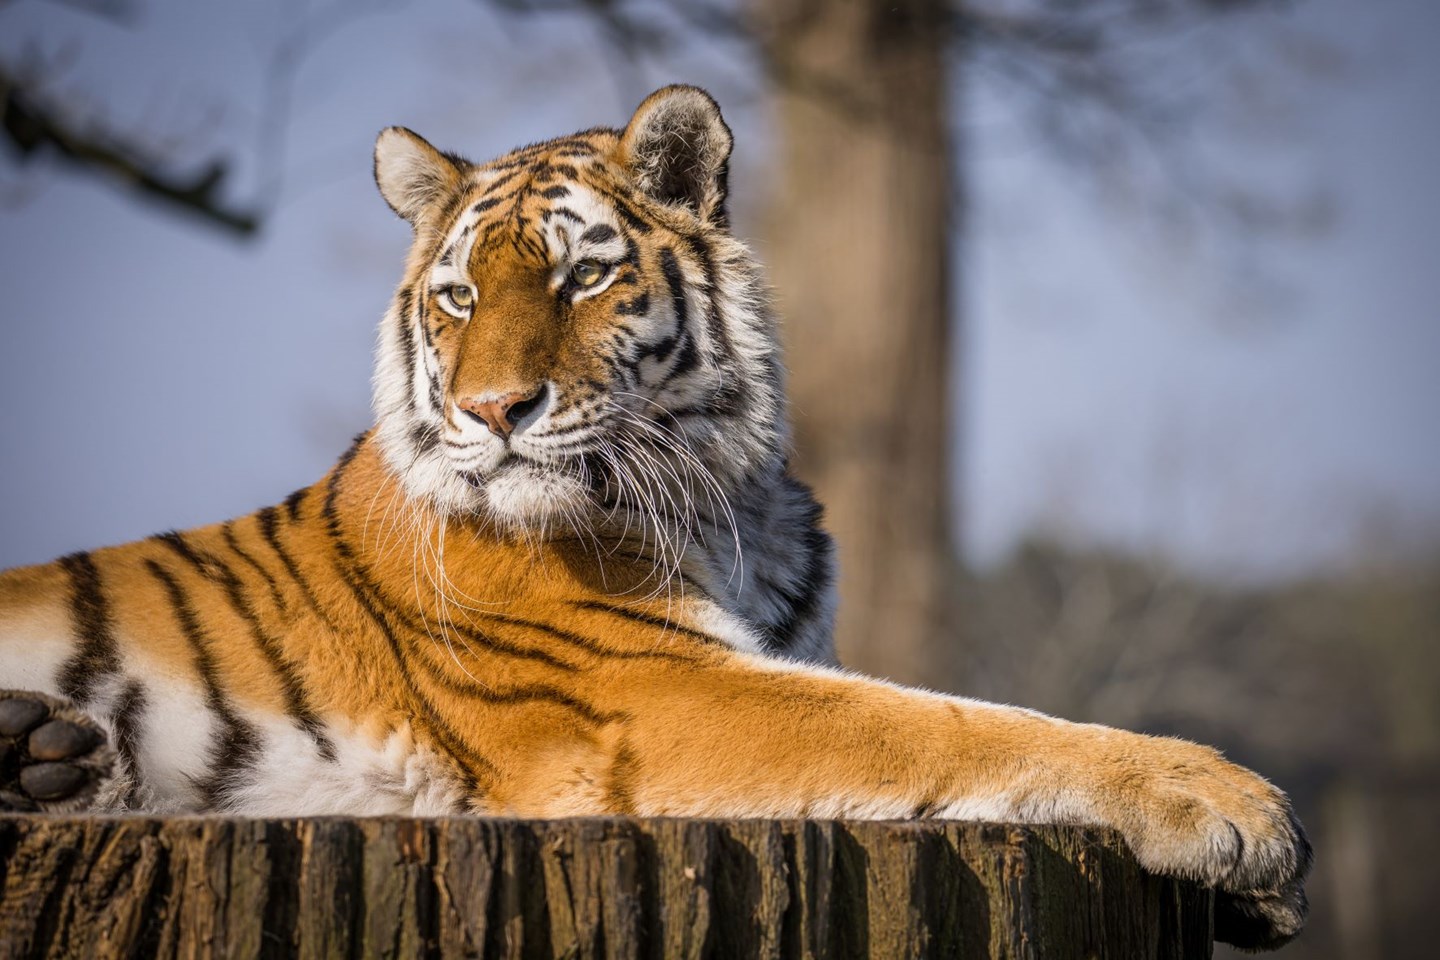 Female tiger looks out over enclosure while lying on tree stump 